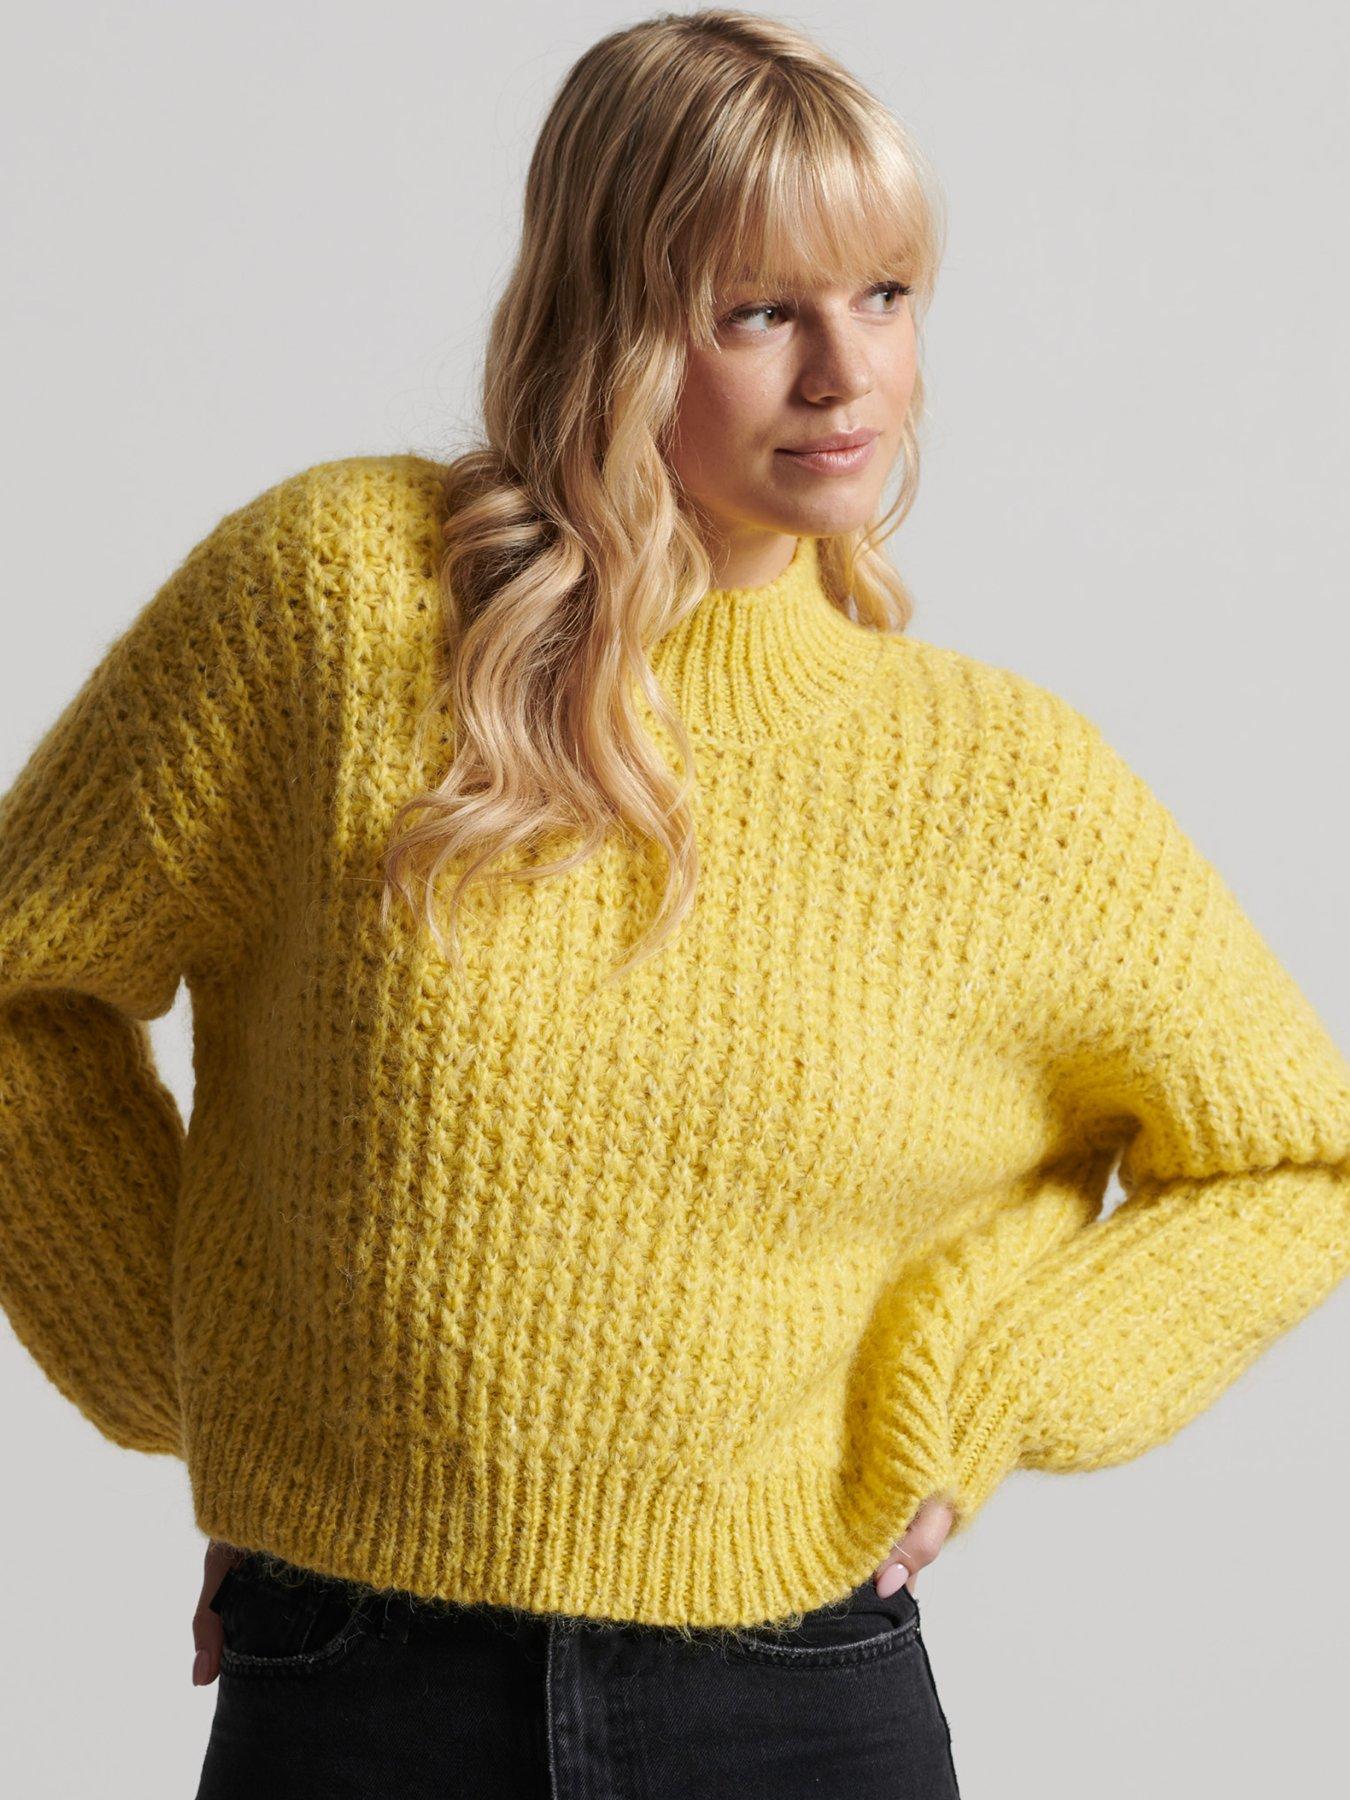  Vintage Brushed Textured Jumper - Yellow